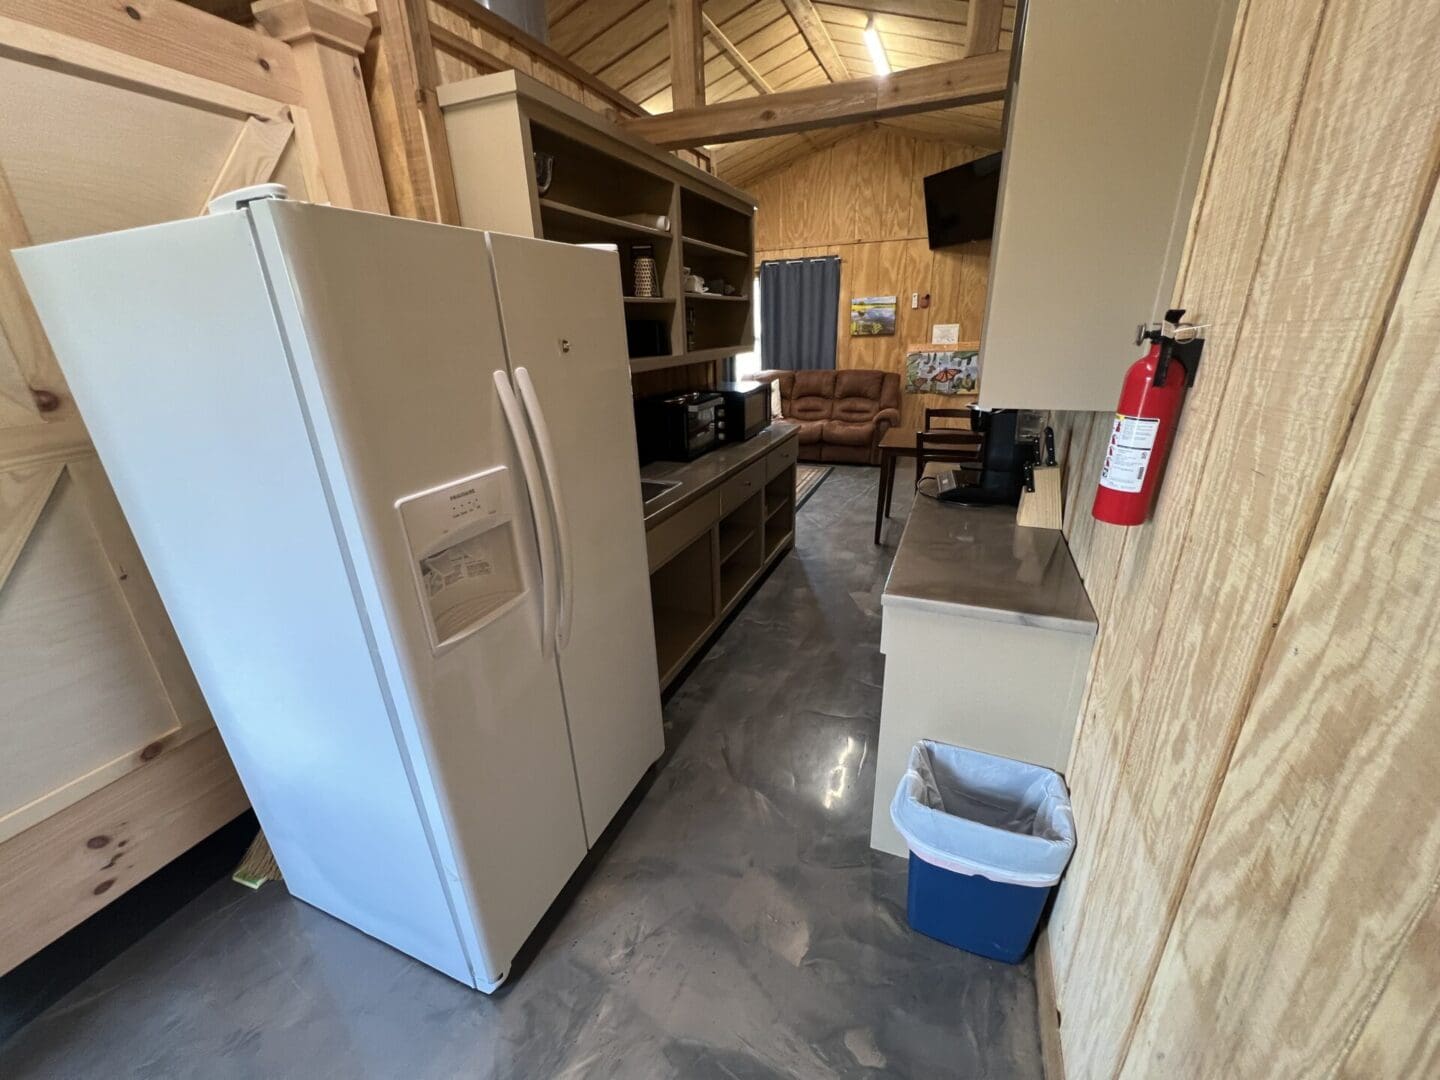 A fridge and kitchen counter top in the field house kitchen